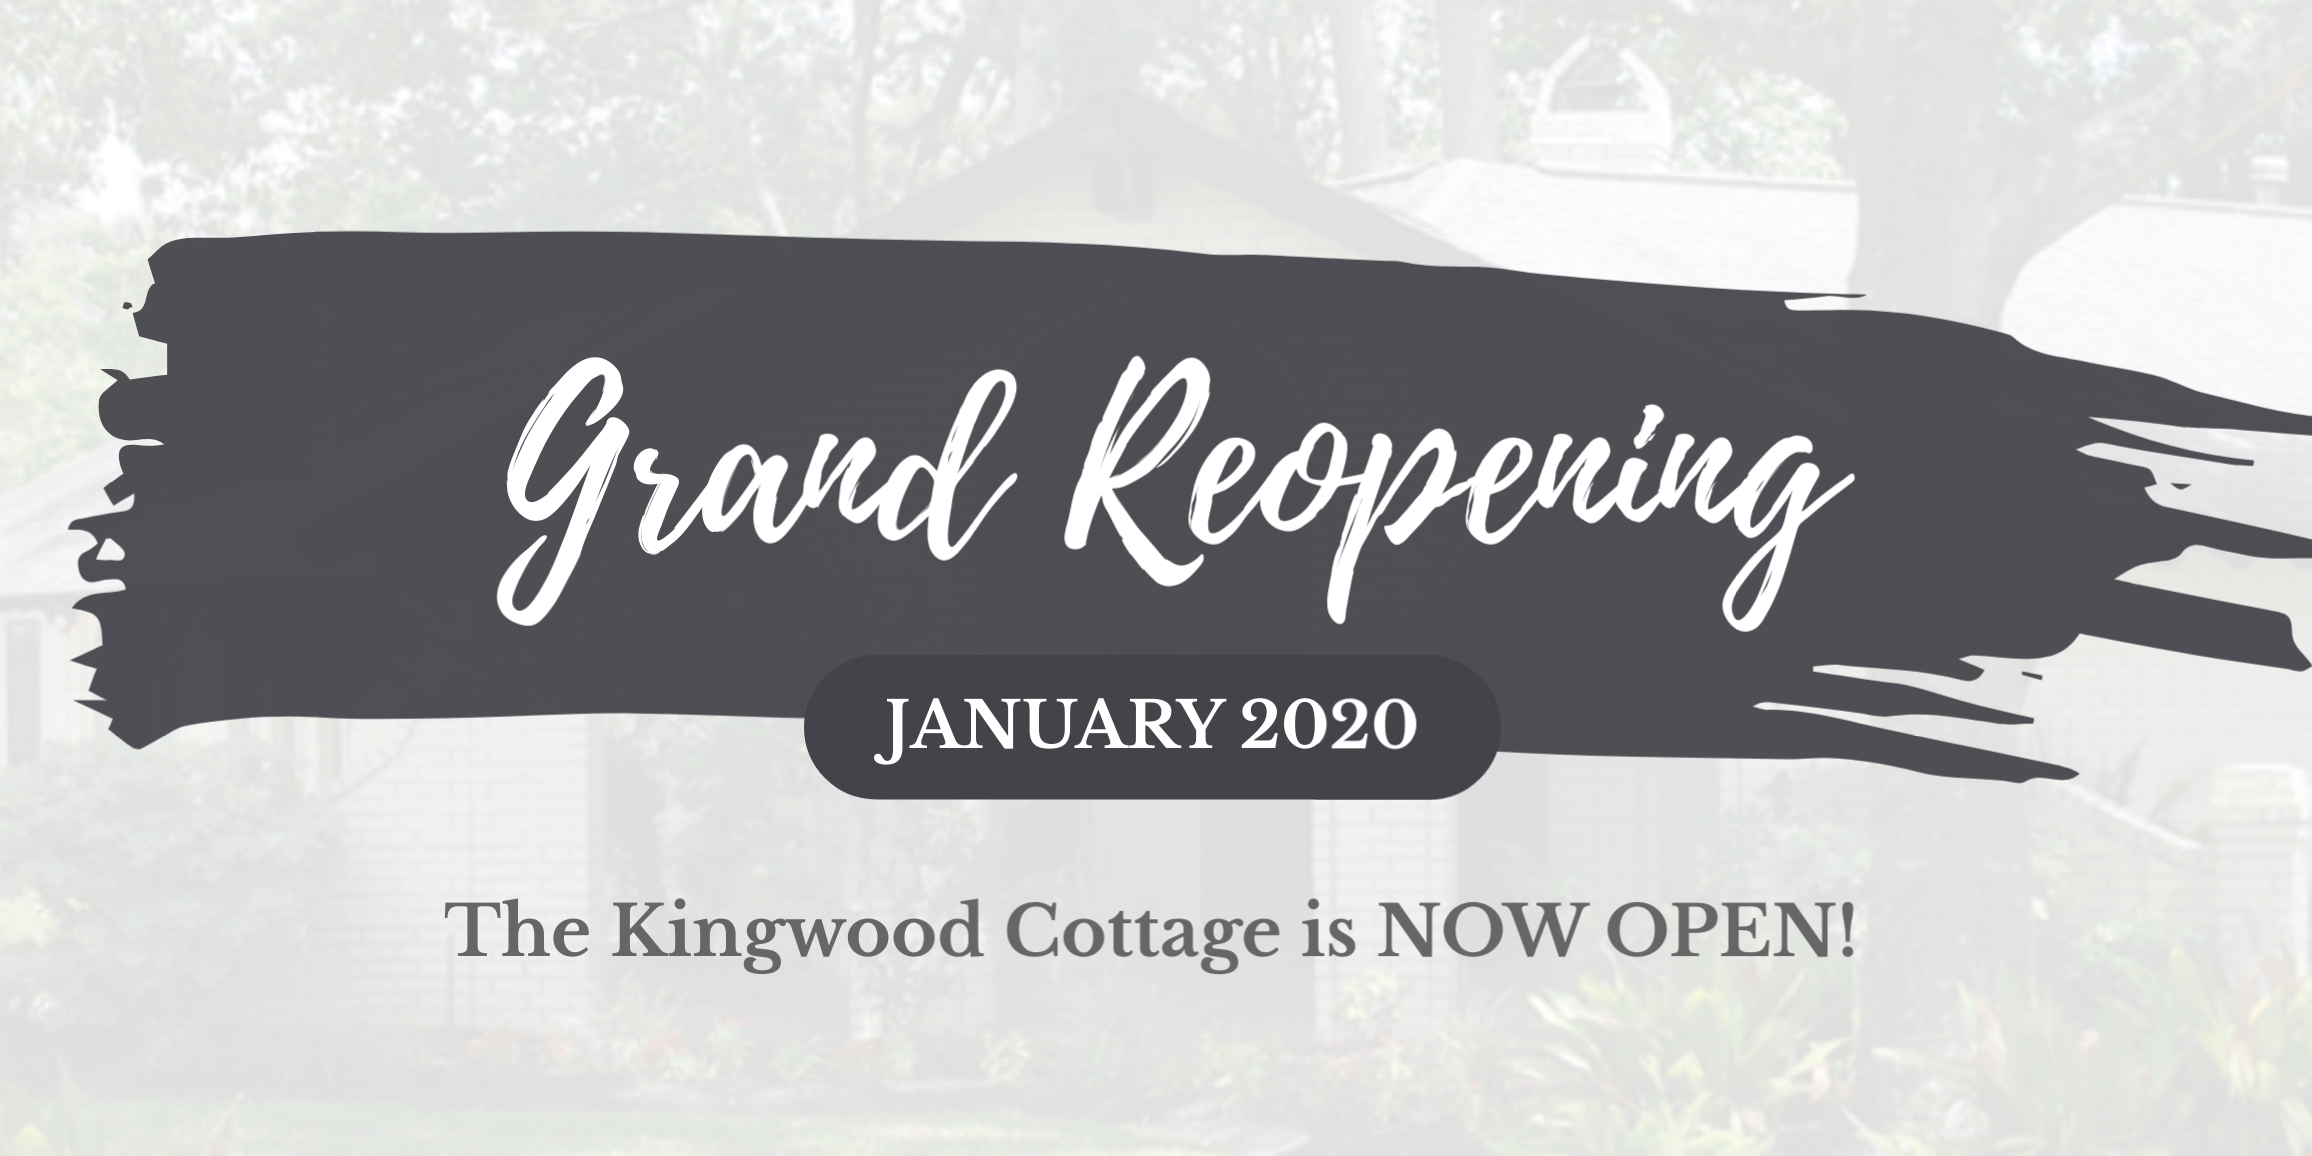 New and Improved Kingwood Cottage: Reopening January 2020, Unlimited Care Cottages, Kingwood TX